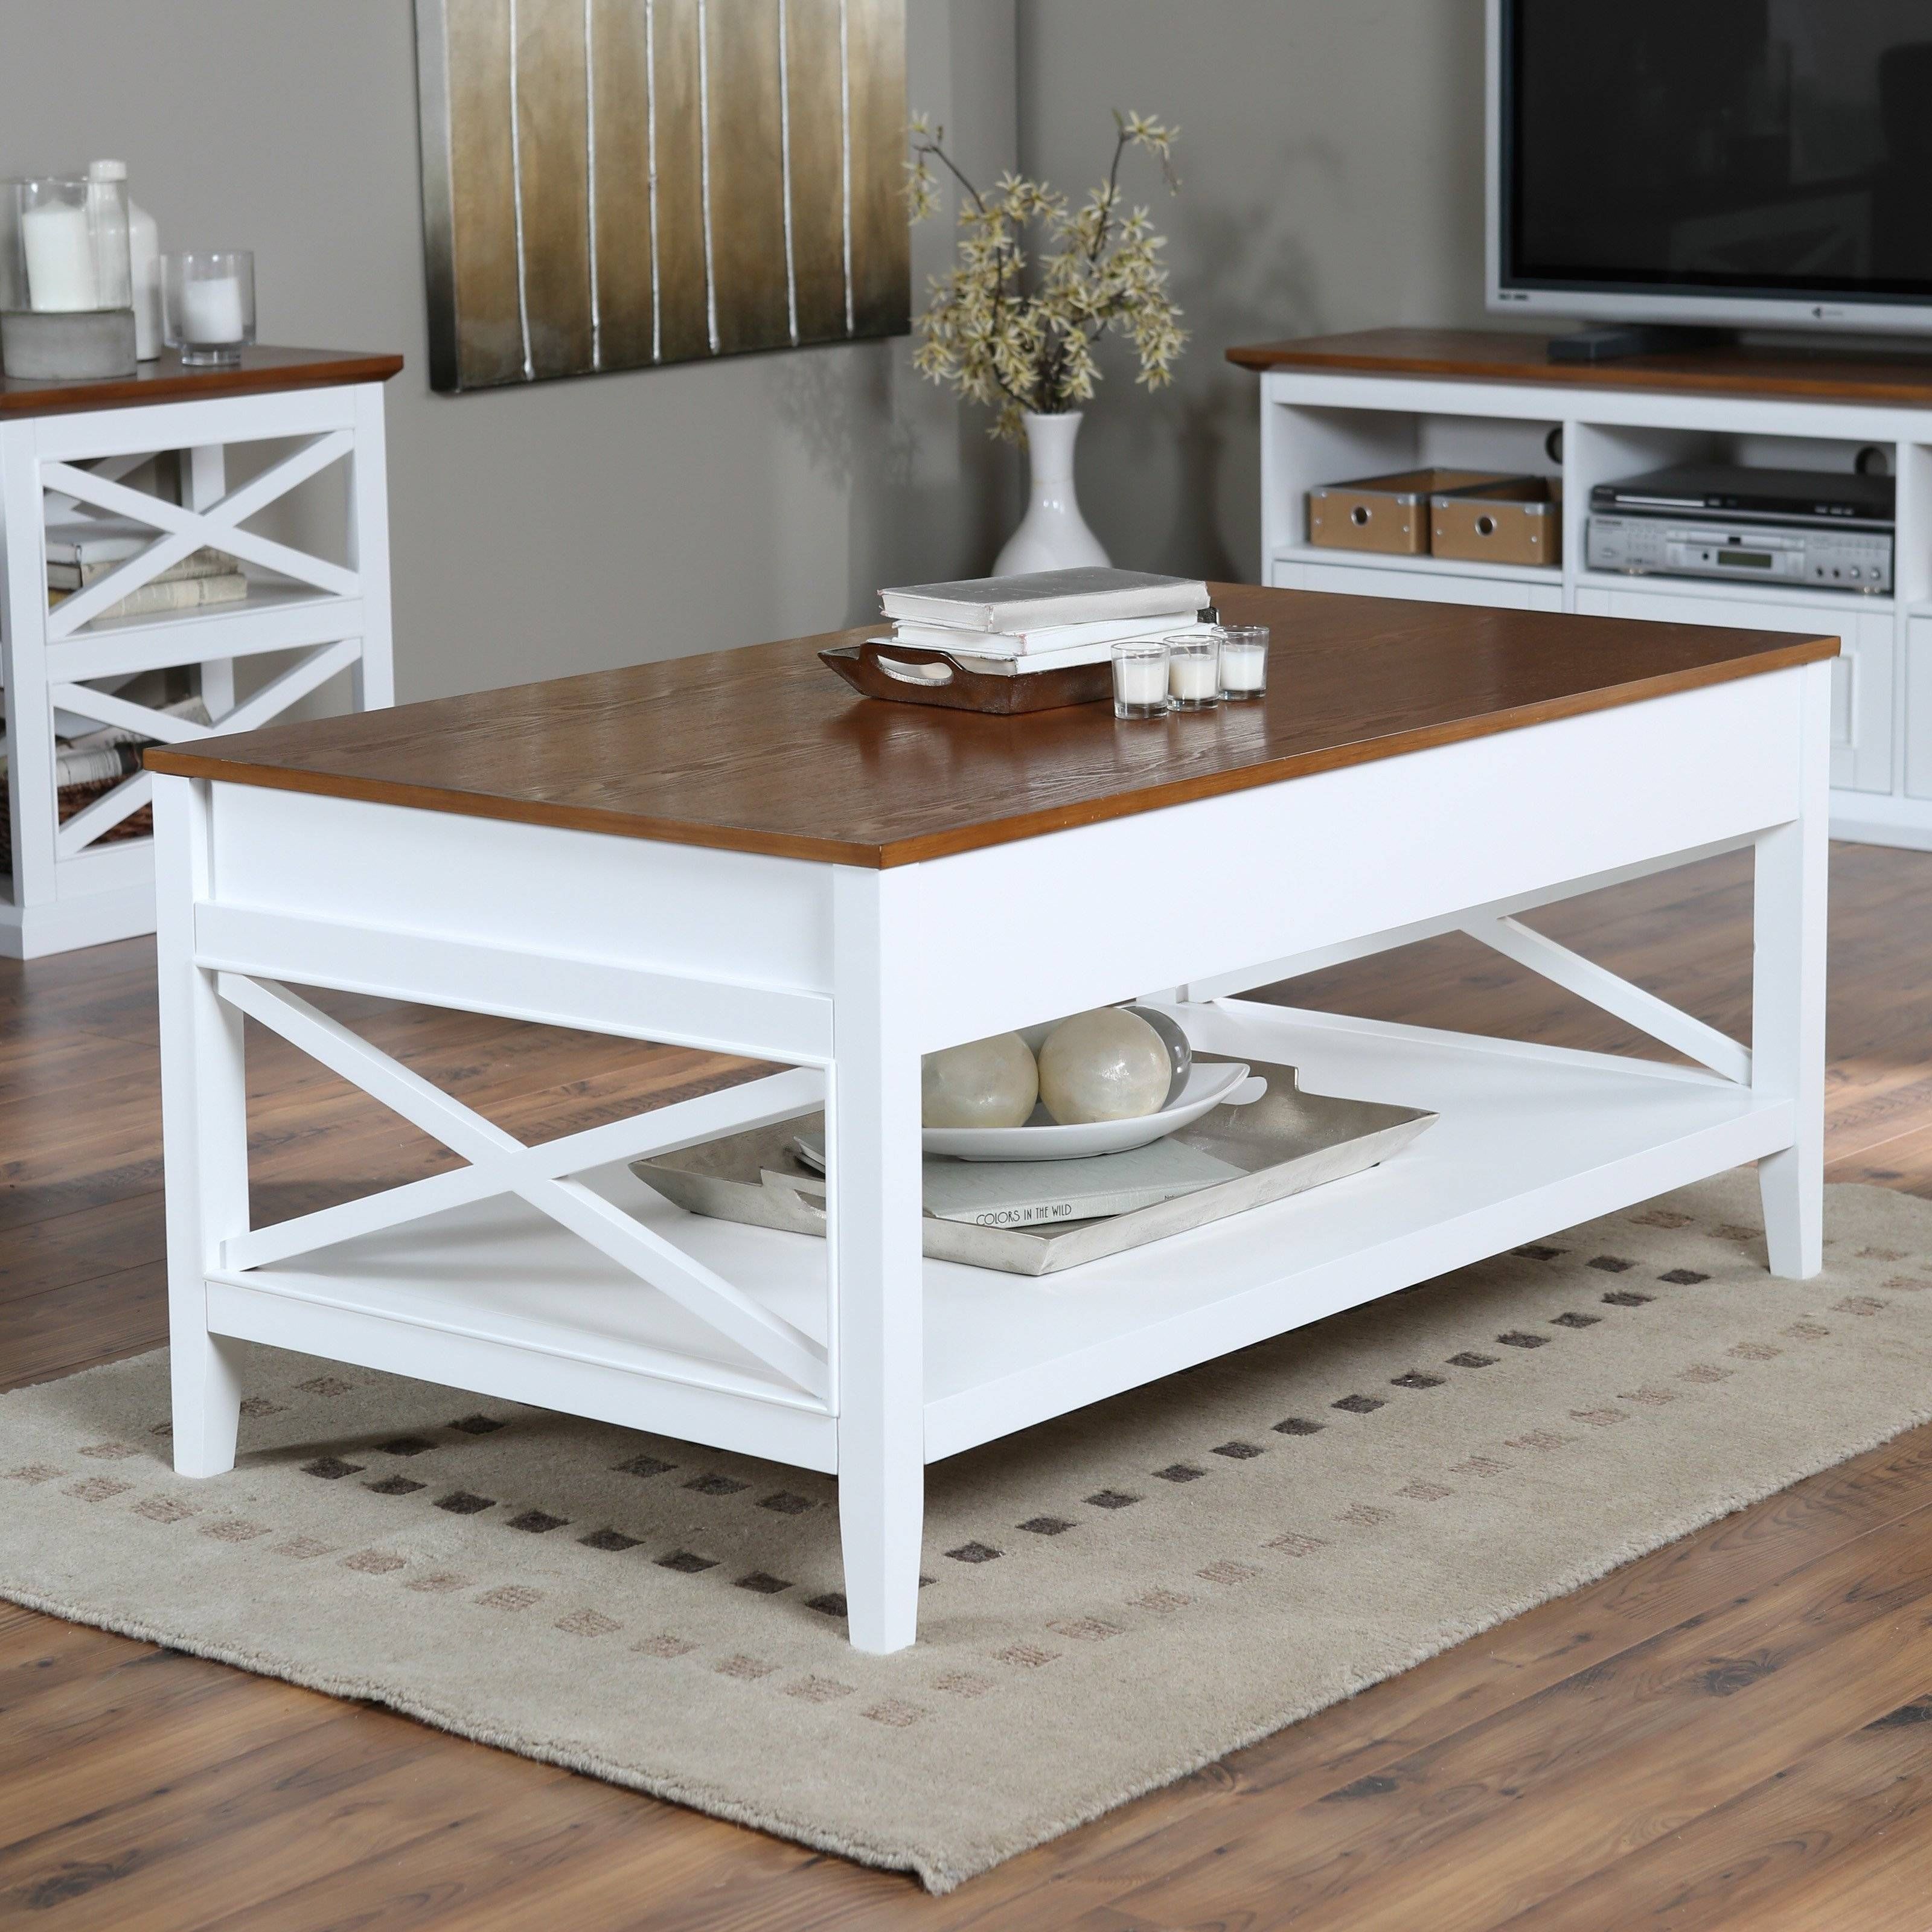 Belham Living Hampton Storage And Lift Top Coffee Table | Hayneedle With Regard To Oak And Cream Coffee Tables (Photo 5 of 30)